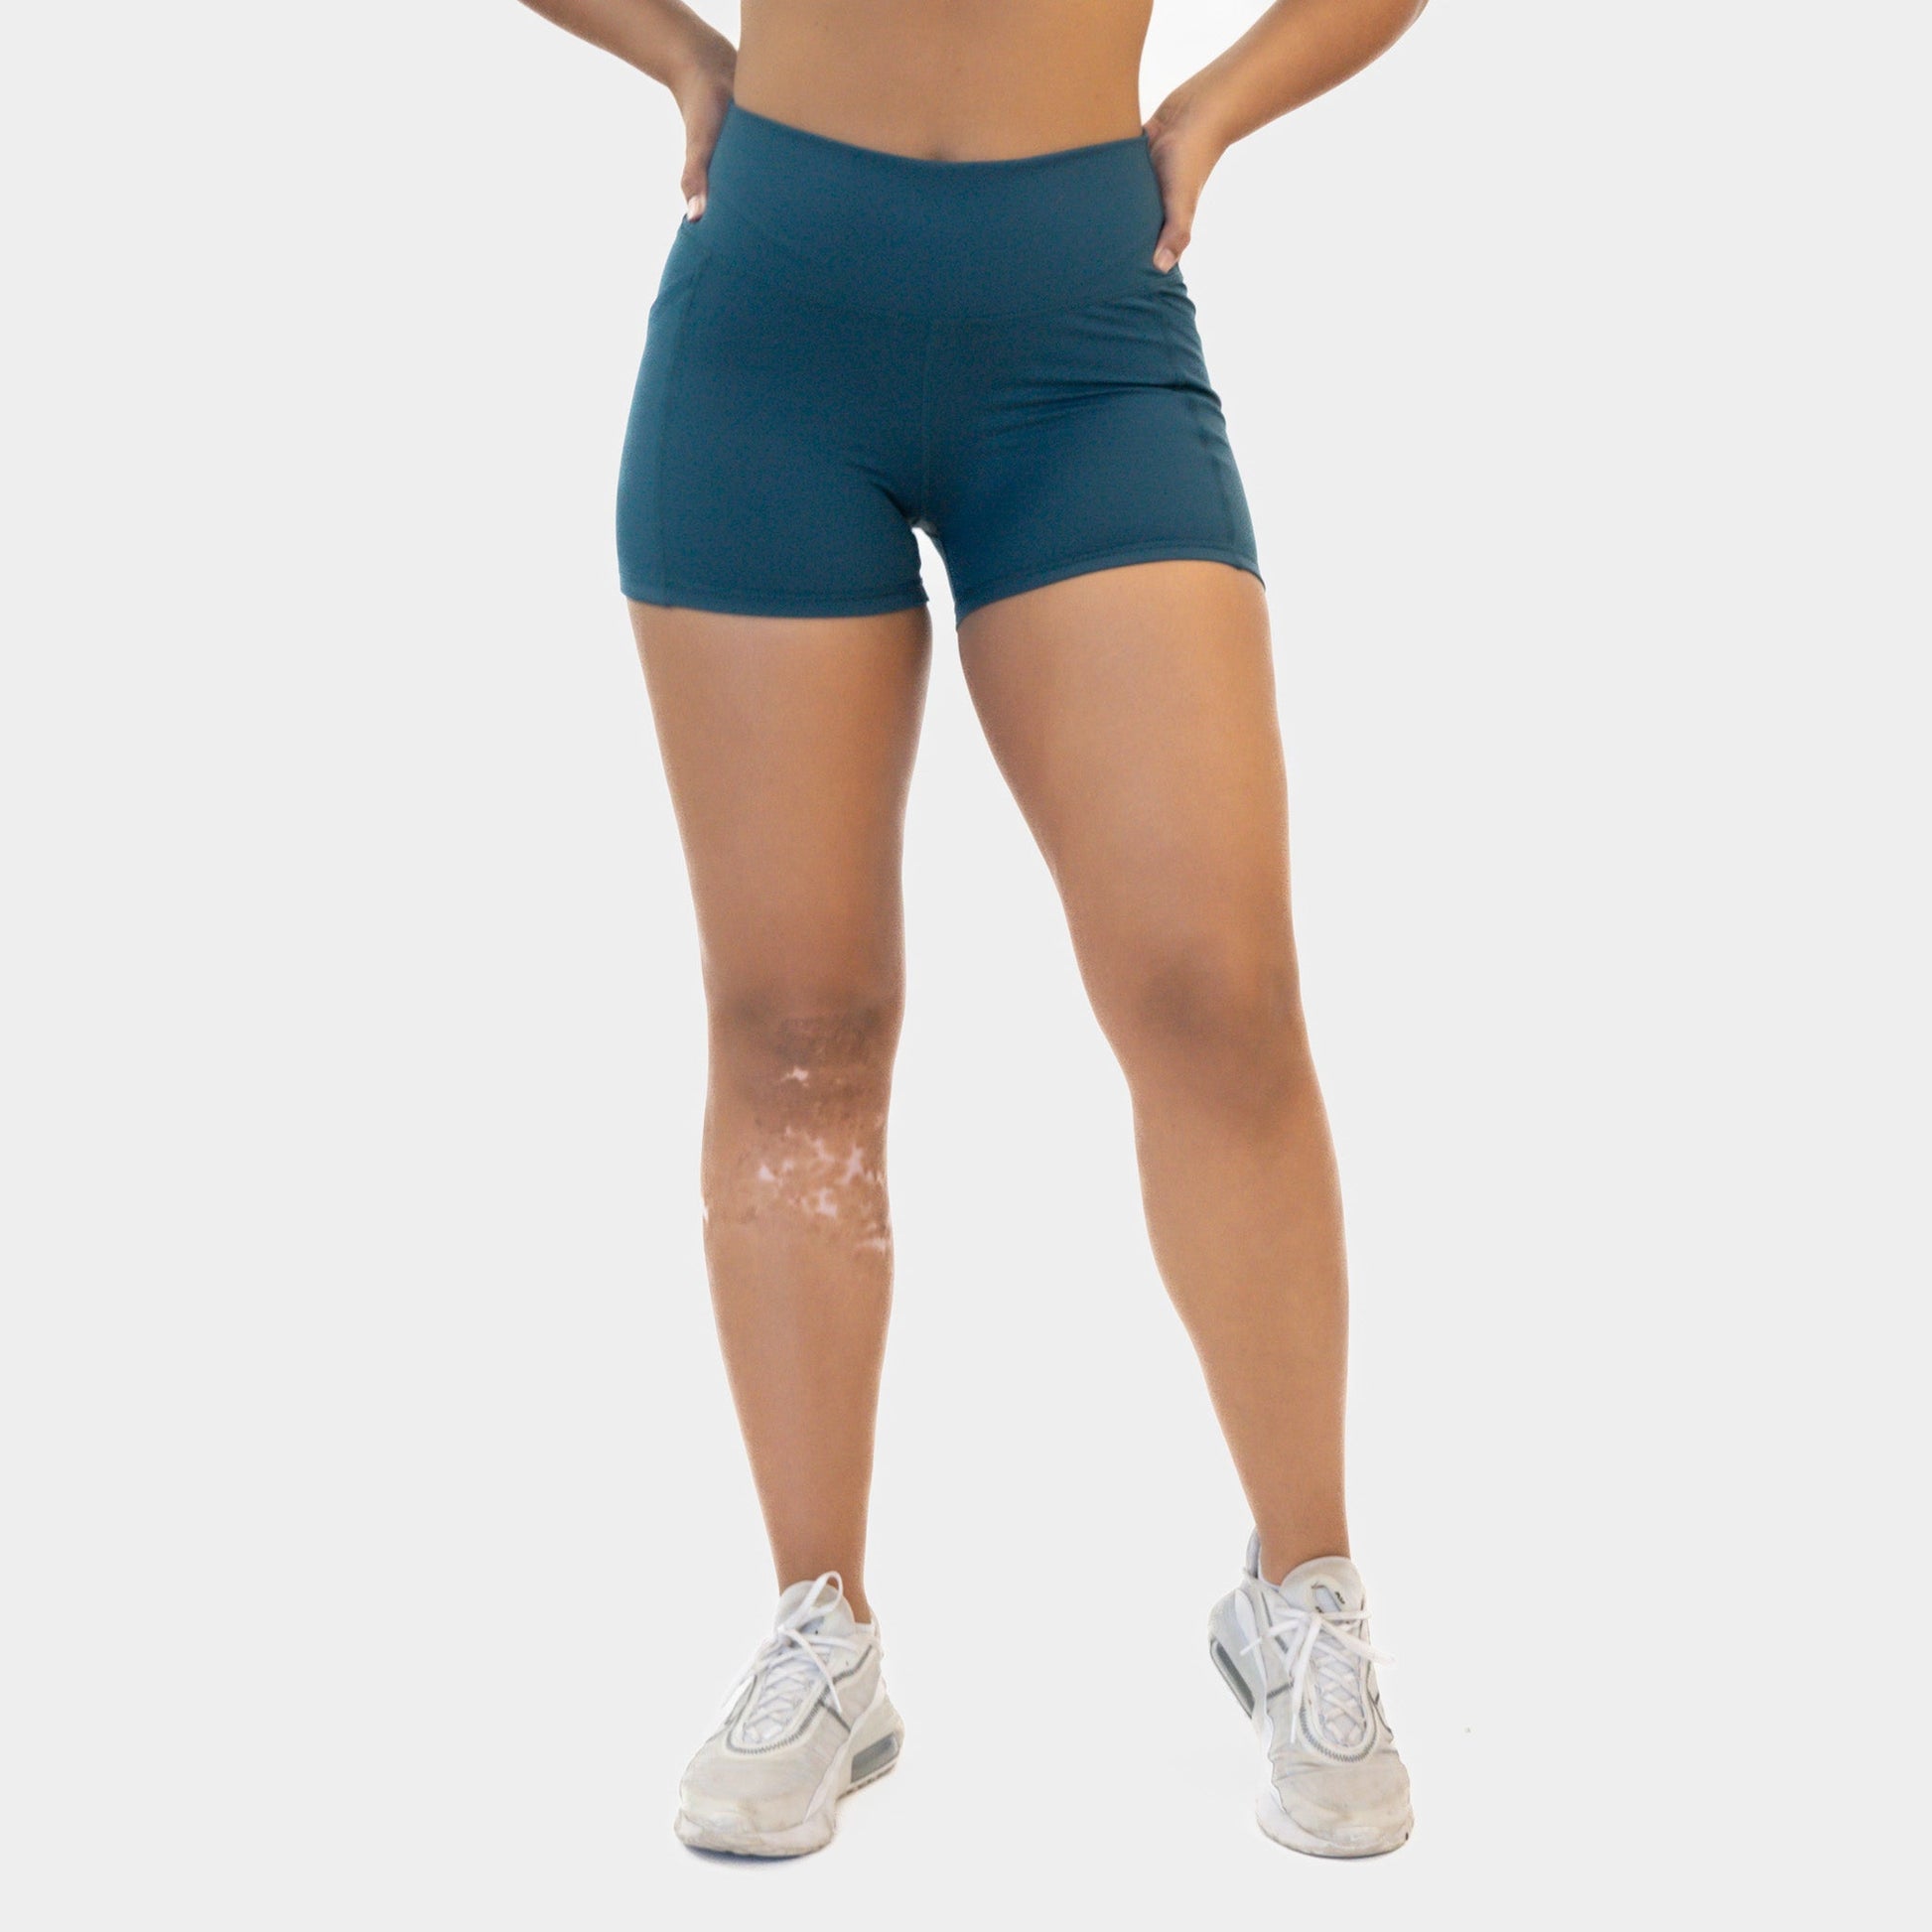 High compression shorts with zipper closure - Style 253 — CYSM Shapers